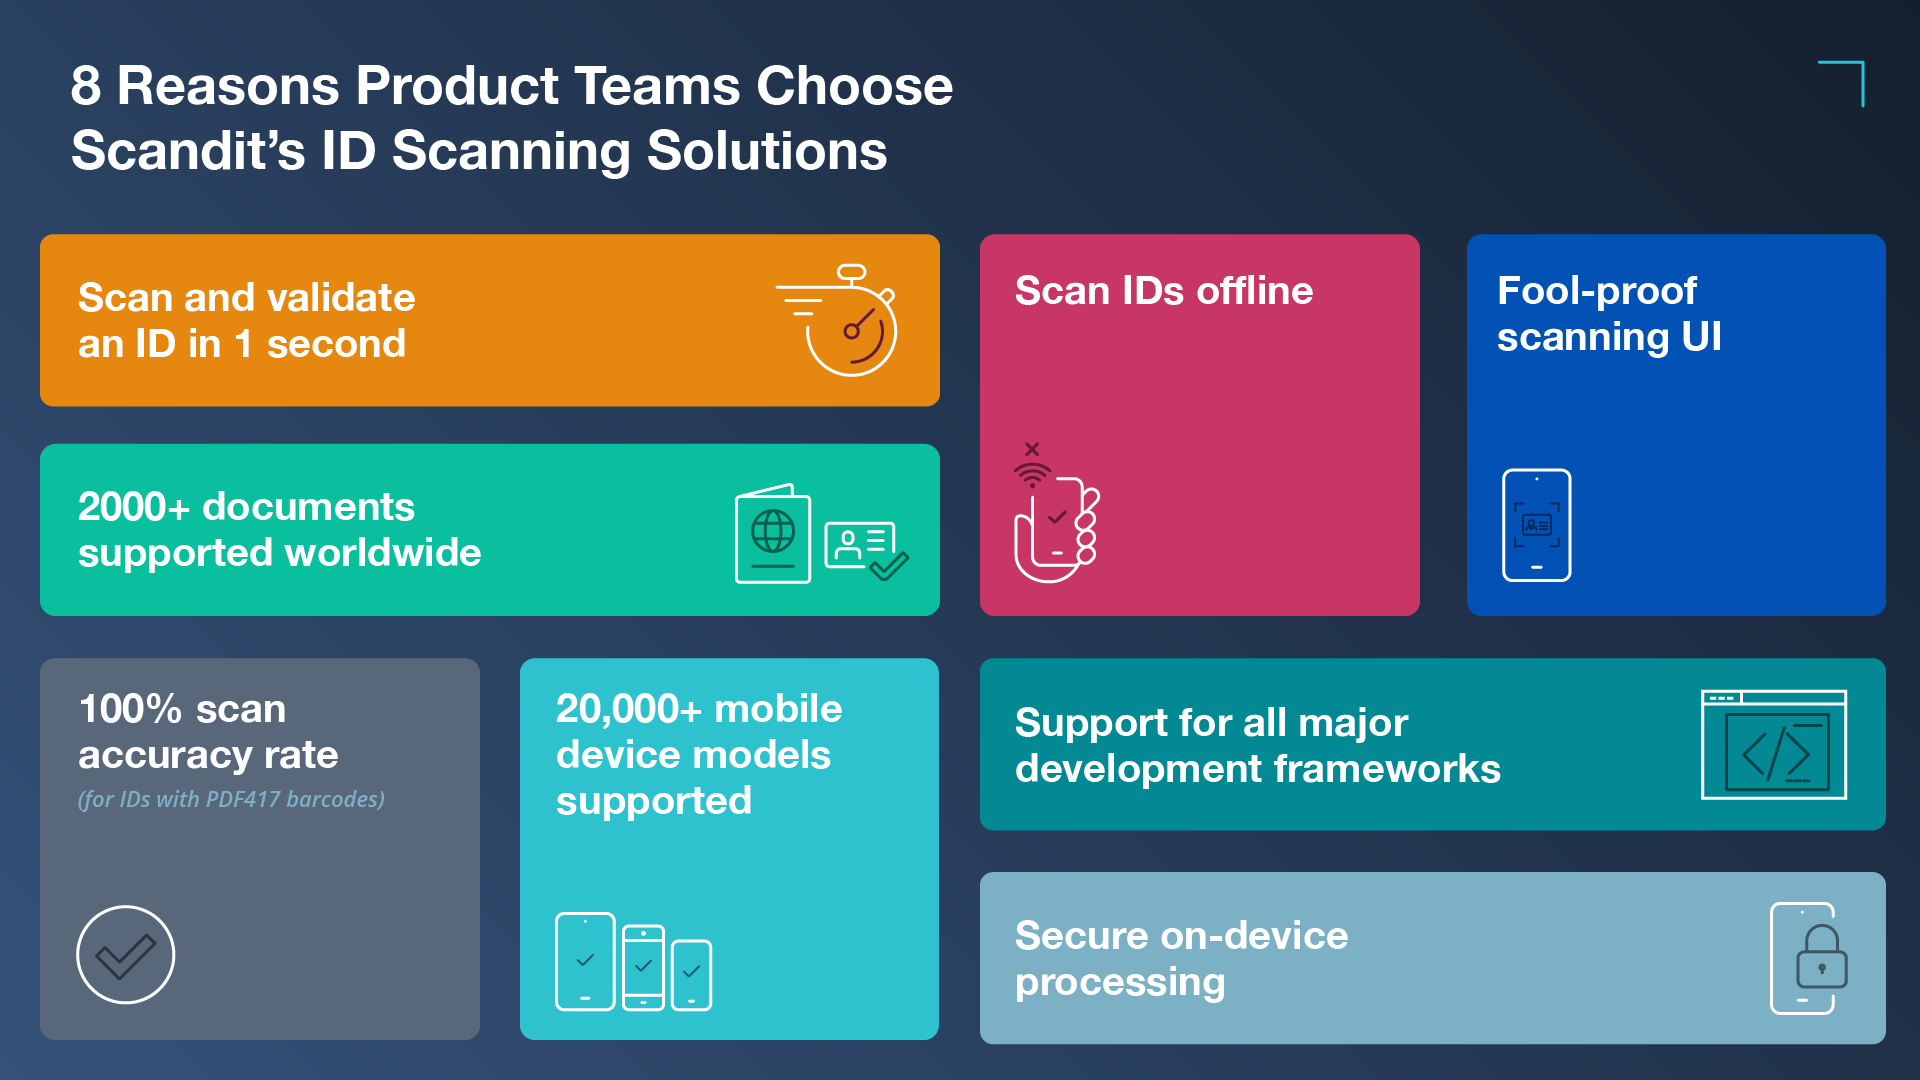 Infographic showing the 8 reasons product teams choose Scandit’s ID scanning solutions 